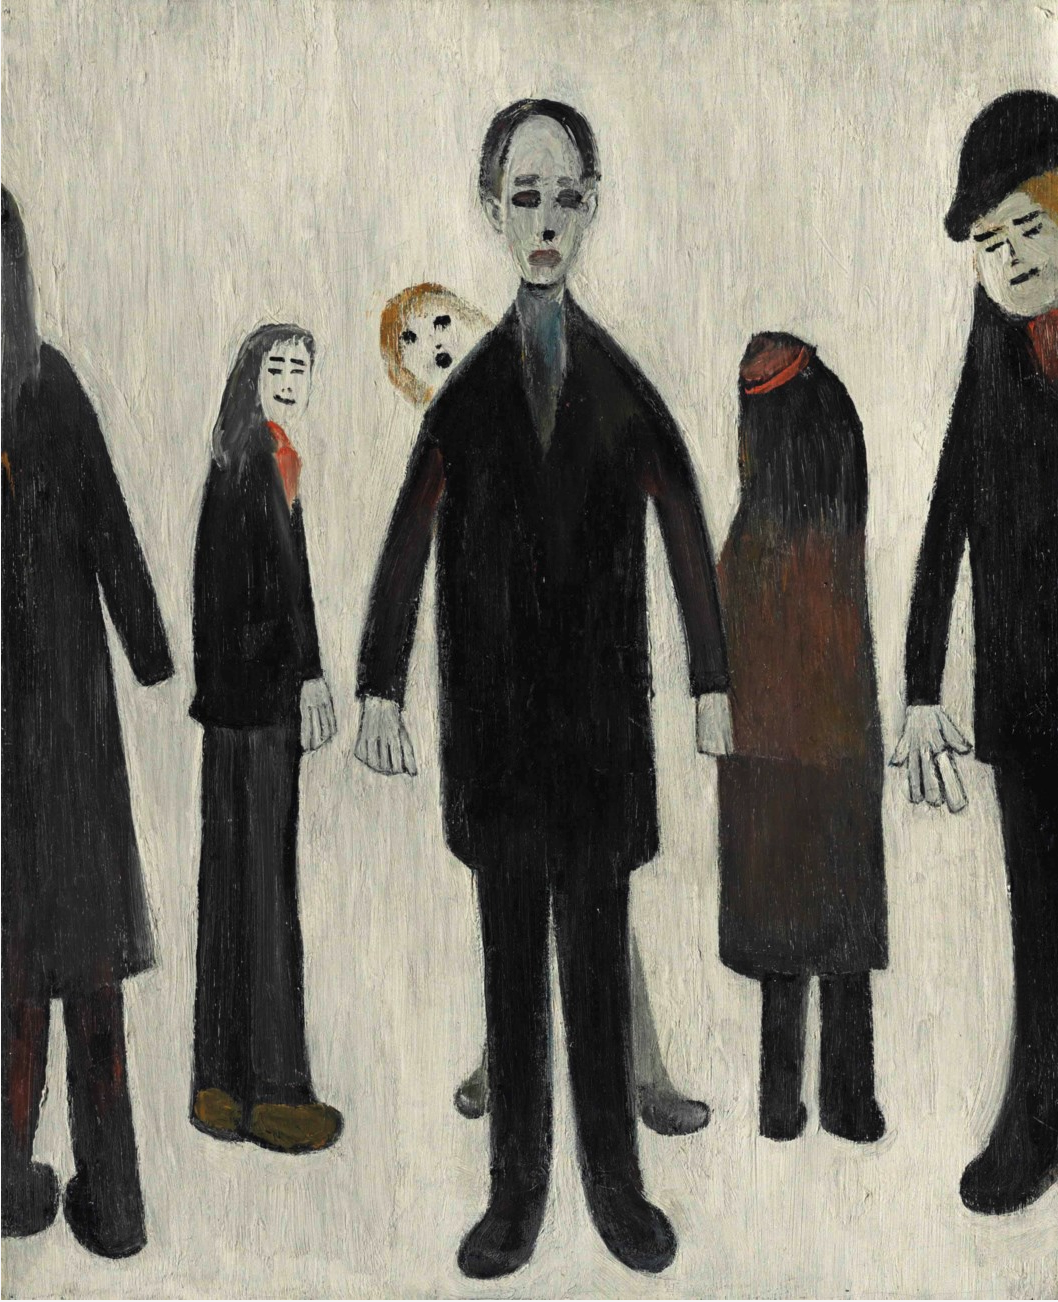 Group of Six People (circa 1958) by Laurence Stephen Lowry (1887 - 1976), English artist.